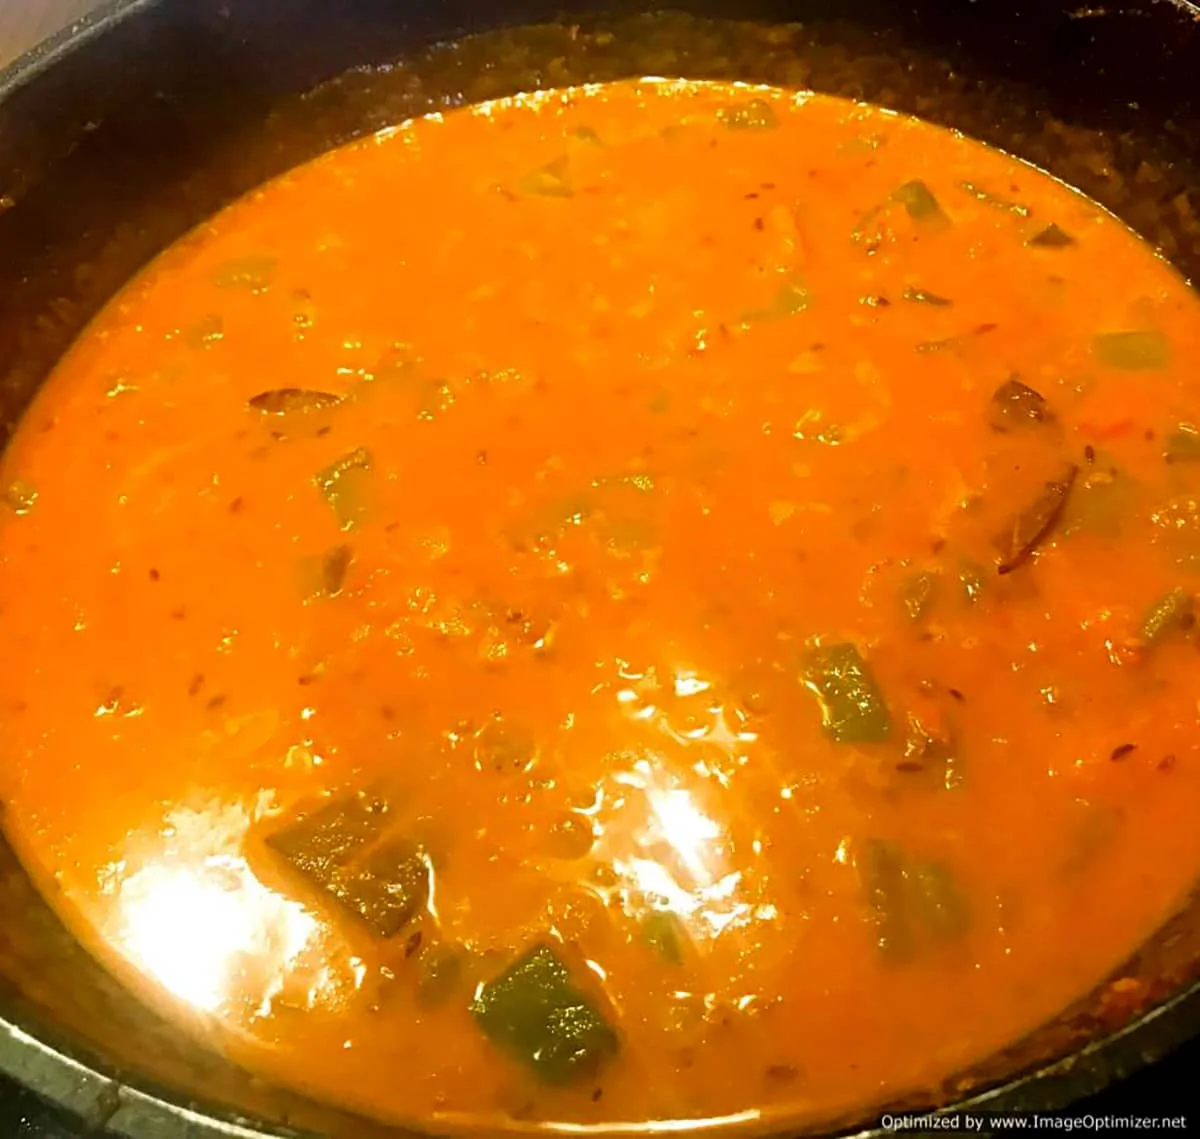 Add water to the pumpkin curry to make the sauce